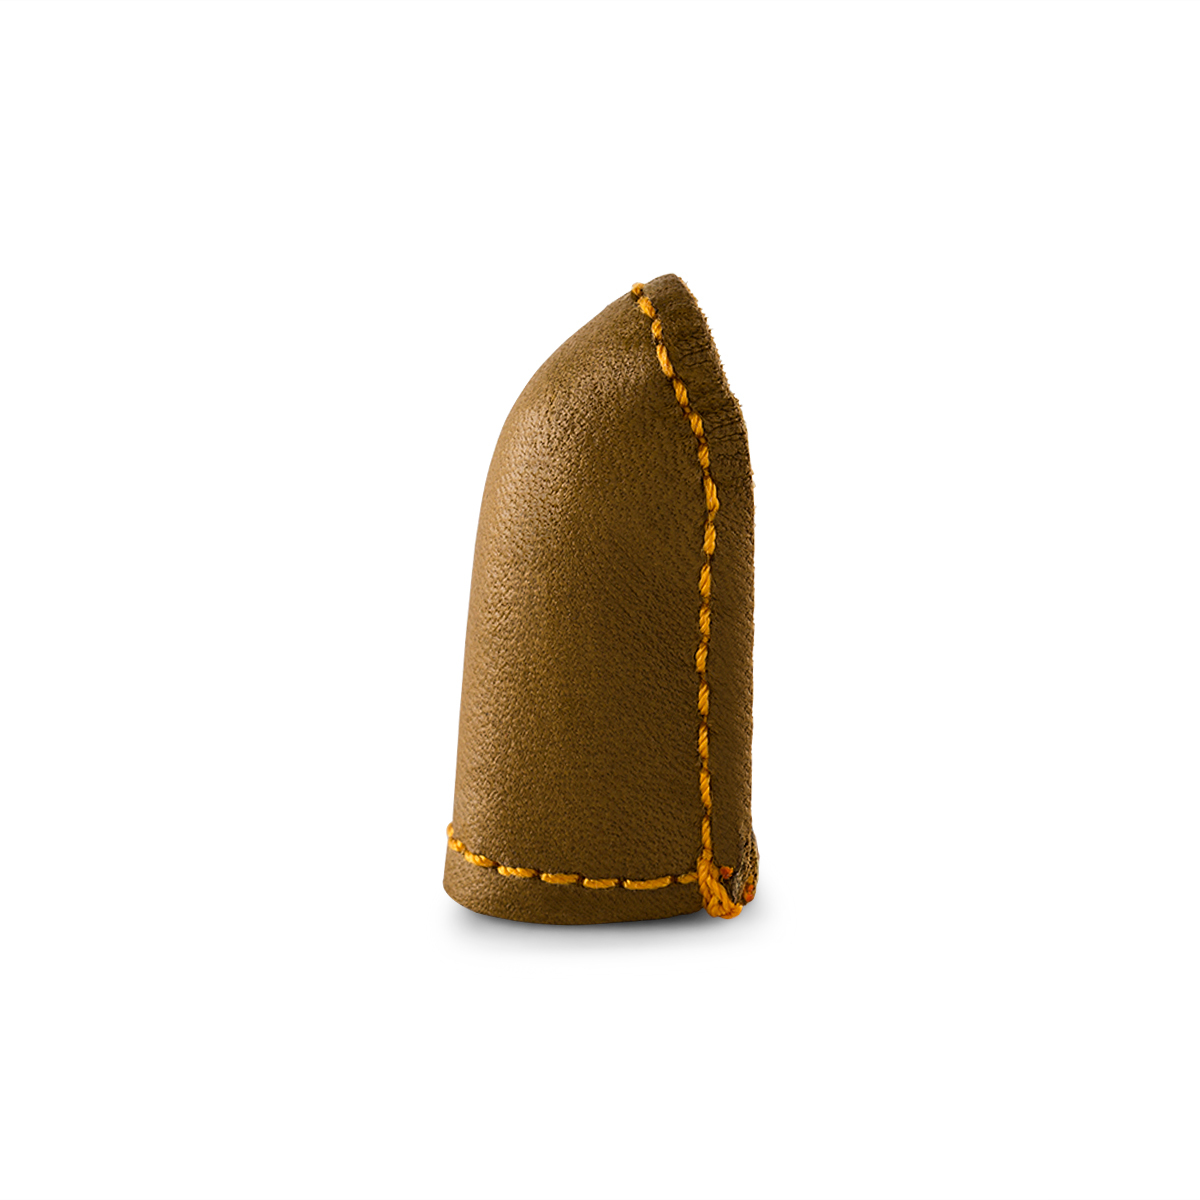 Large Size Leather Thimble, Leather Thimble, Thimble, Leather For Hand  Sewing For Sewing Tool 